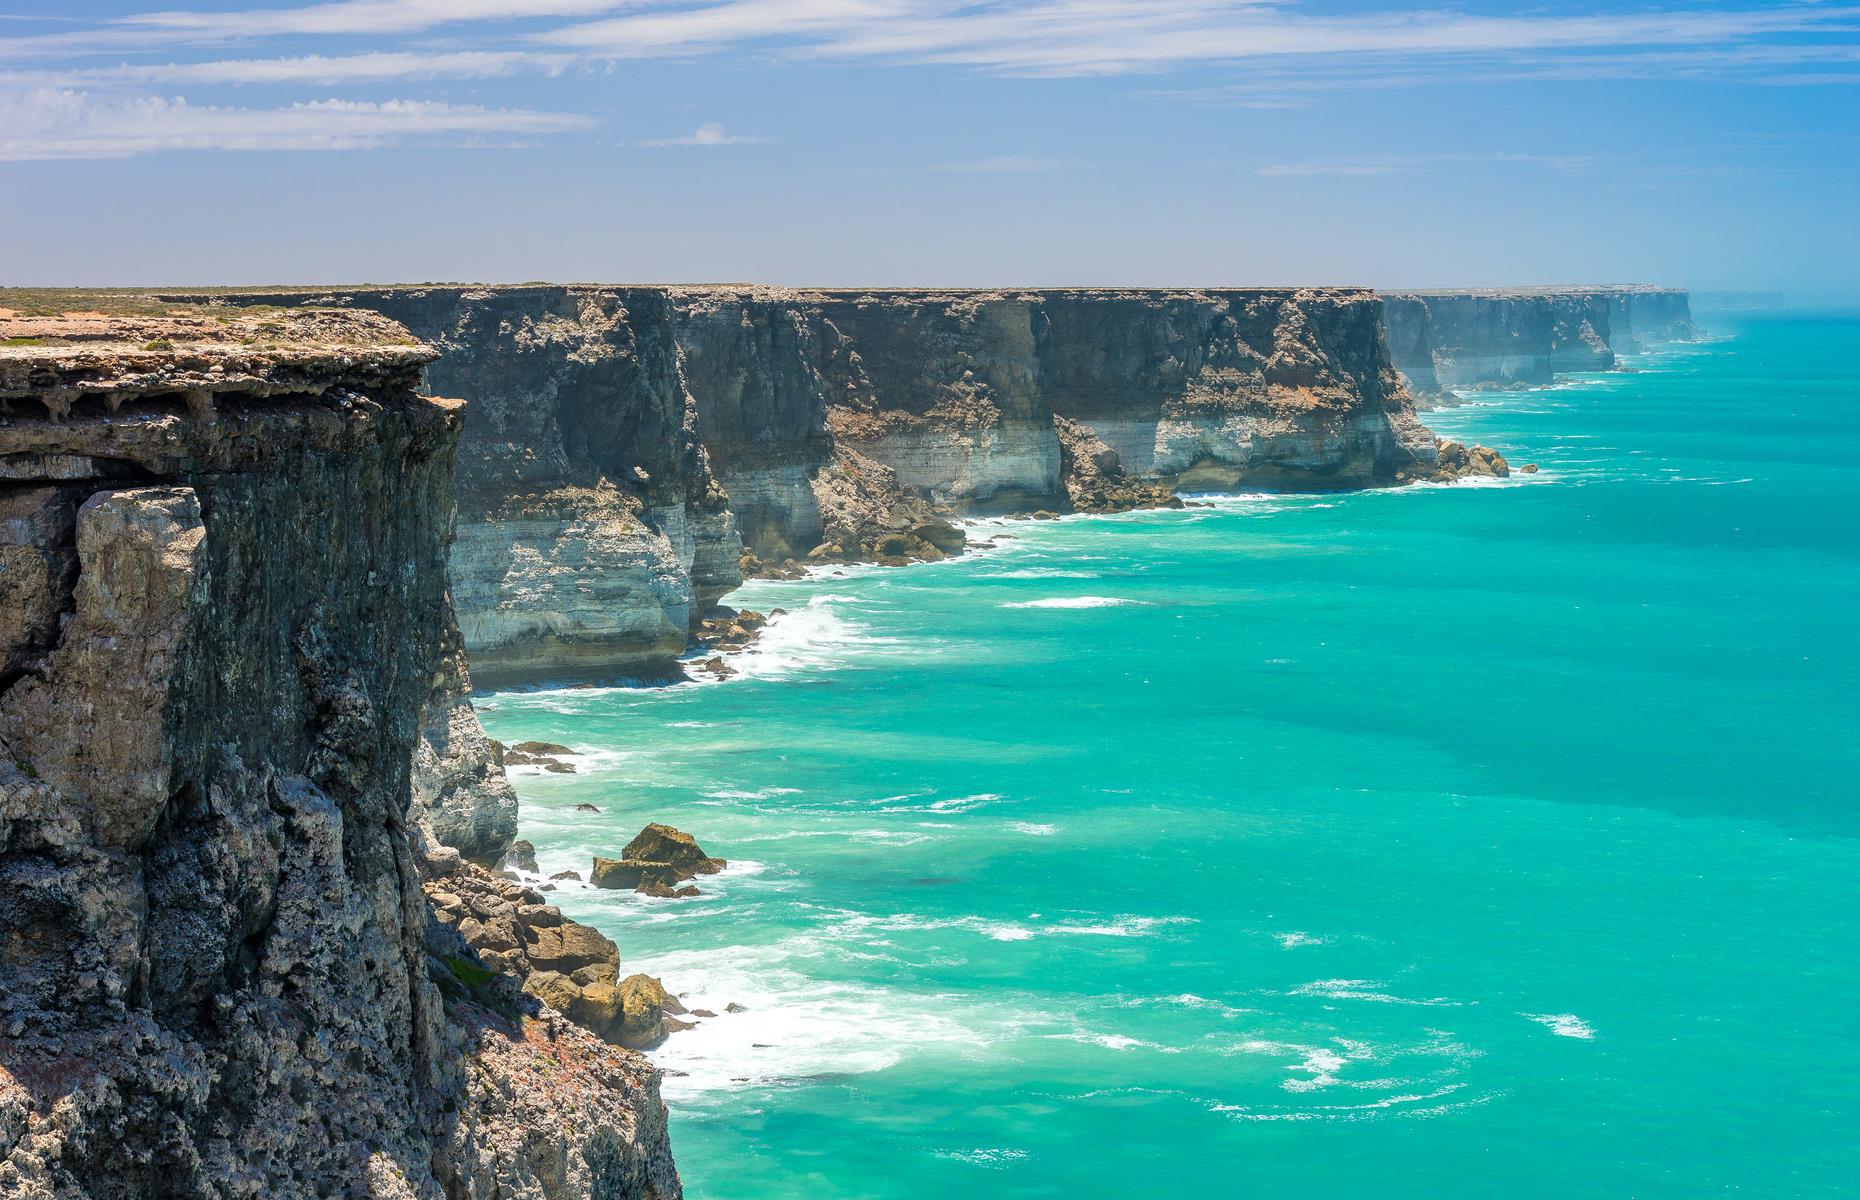 <p>Breathtaking doesn’t begin to cover the view as you stand buffeted by wind on top of the vertical cliffs of the large oceanic bight in South Australia. On the southern edge of the Nullabor Plain, the Bunda Cliffs, which reach heights of between 60 and 100m (200 and 400ft), are one of the park's most spectacular sights. It's also a top spot for watching southern right whales as they migrate between May and October – this is an important calving area for the endangered marine mammals. Around 80% of Australia’s native sea lion population are also found here.</p>